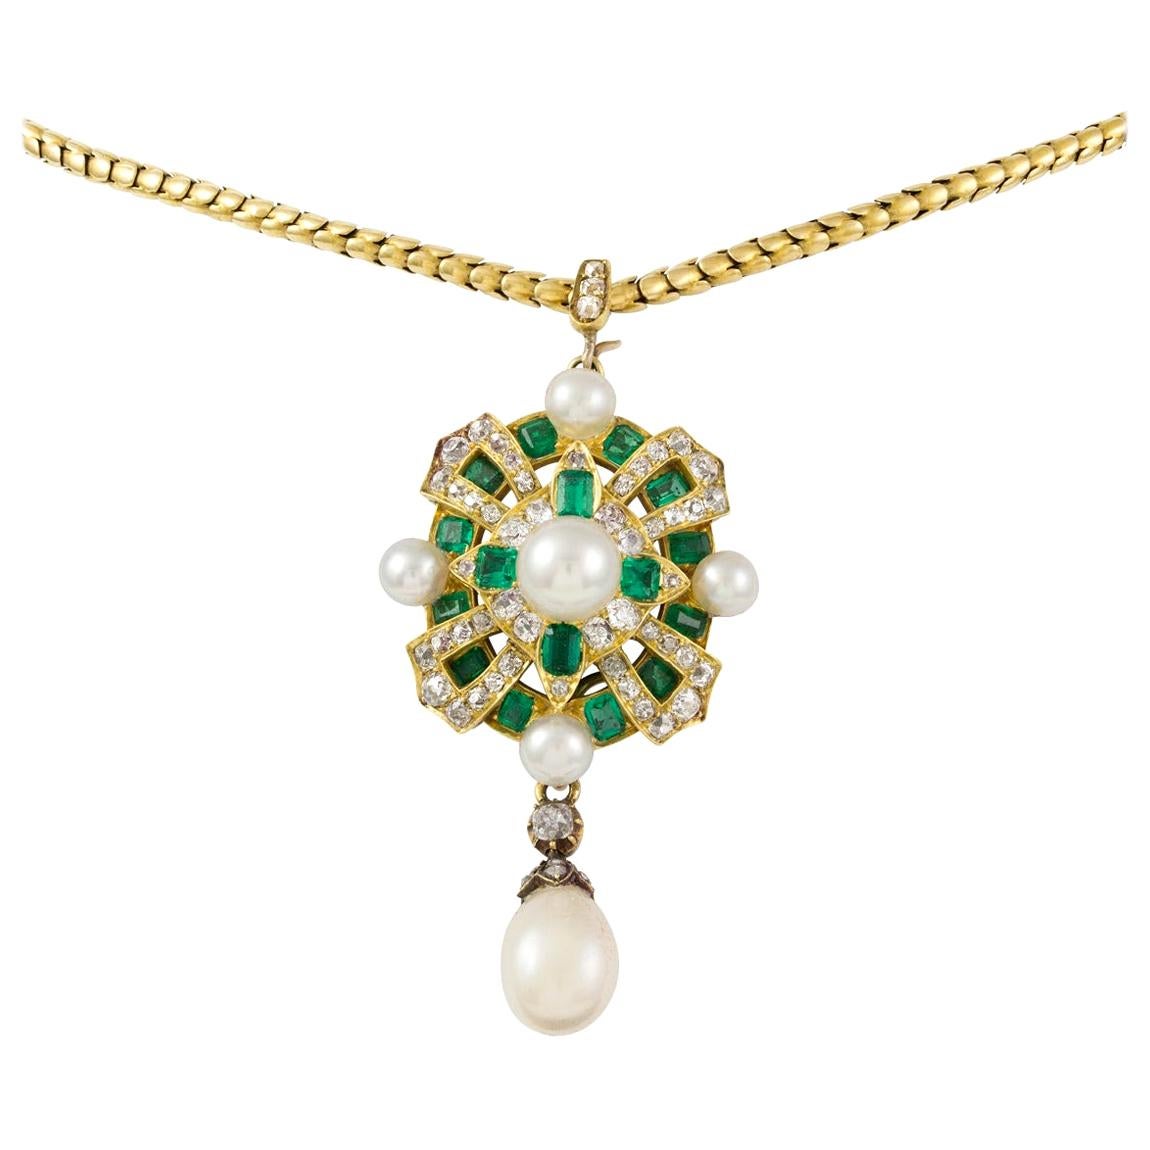 A magnificent mid-Victorian natural peal, emerald and diamond pendant, to the centre a natural pearl measuring approximately 7.7mm in diameter, surrounded by a lozenge-shaped frame set with four rectangular-cut emerald and eight old European-cut